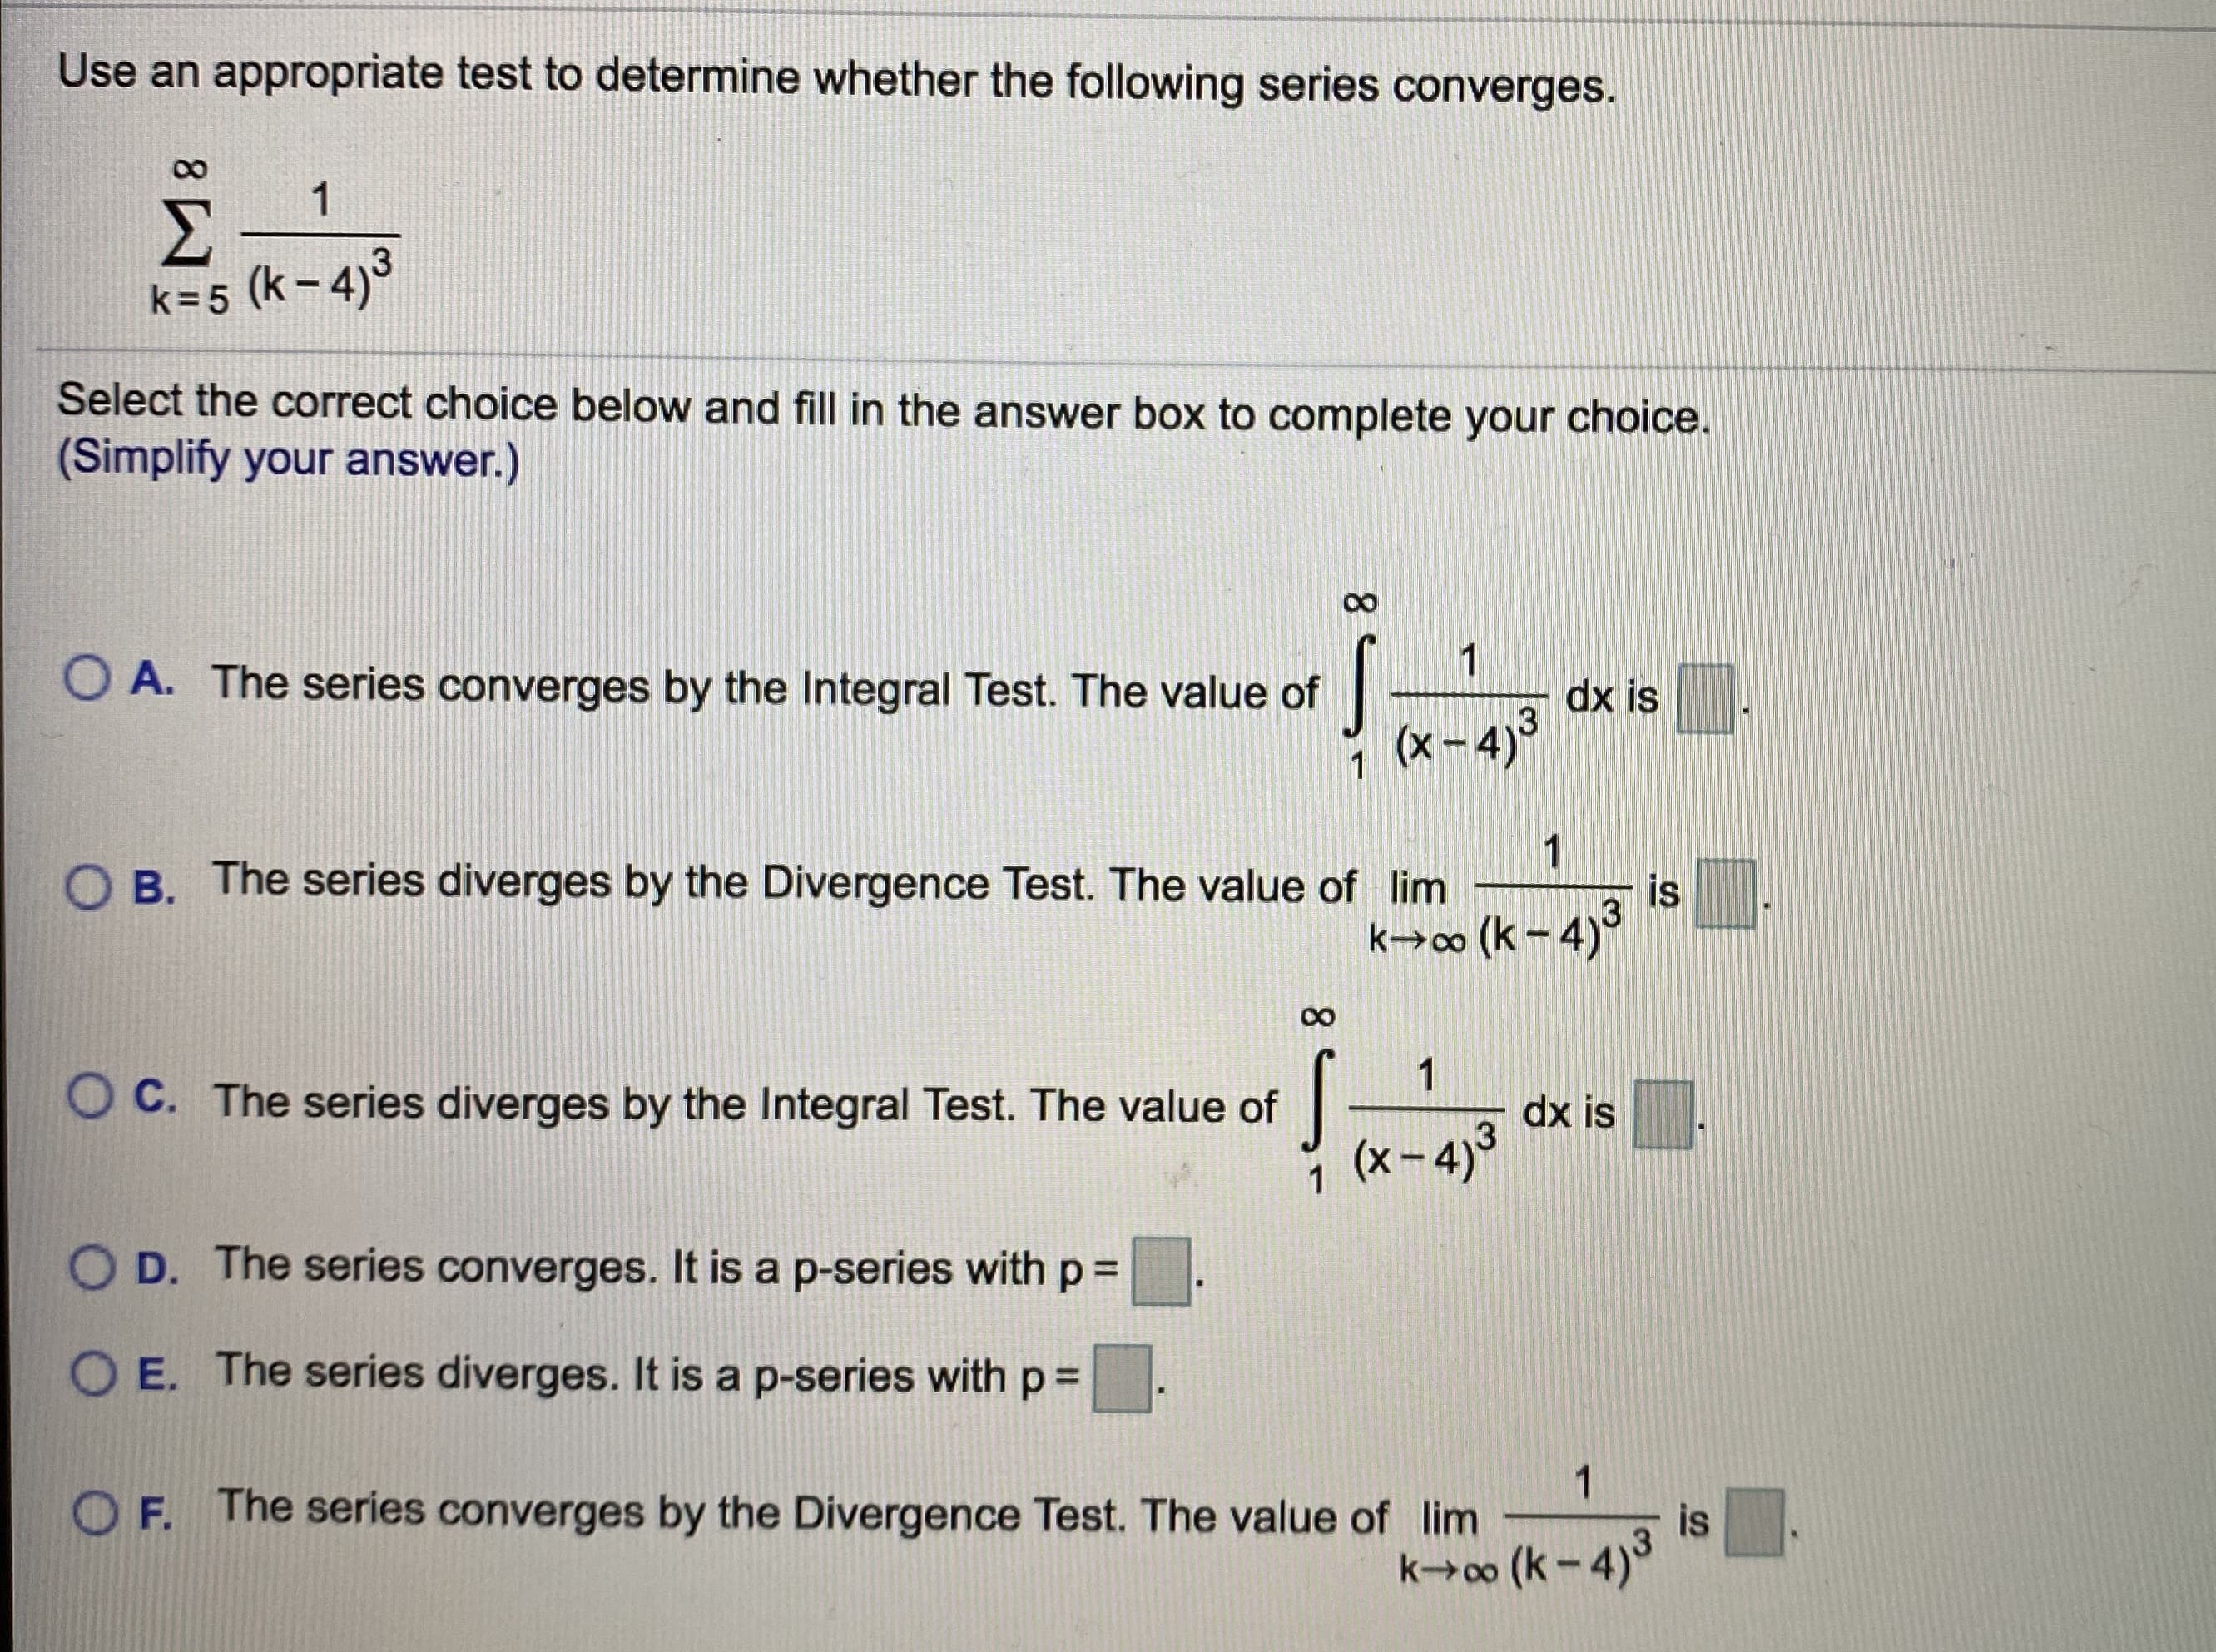 Use an appropriate test to determine whether the following series converges.
1
Σ
k=5 (k- 4)3
